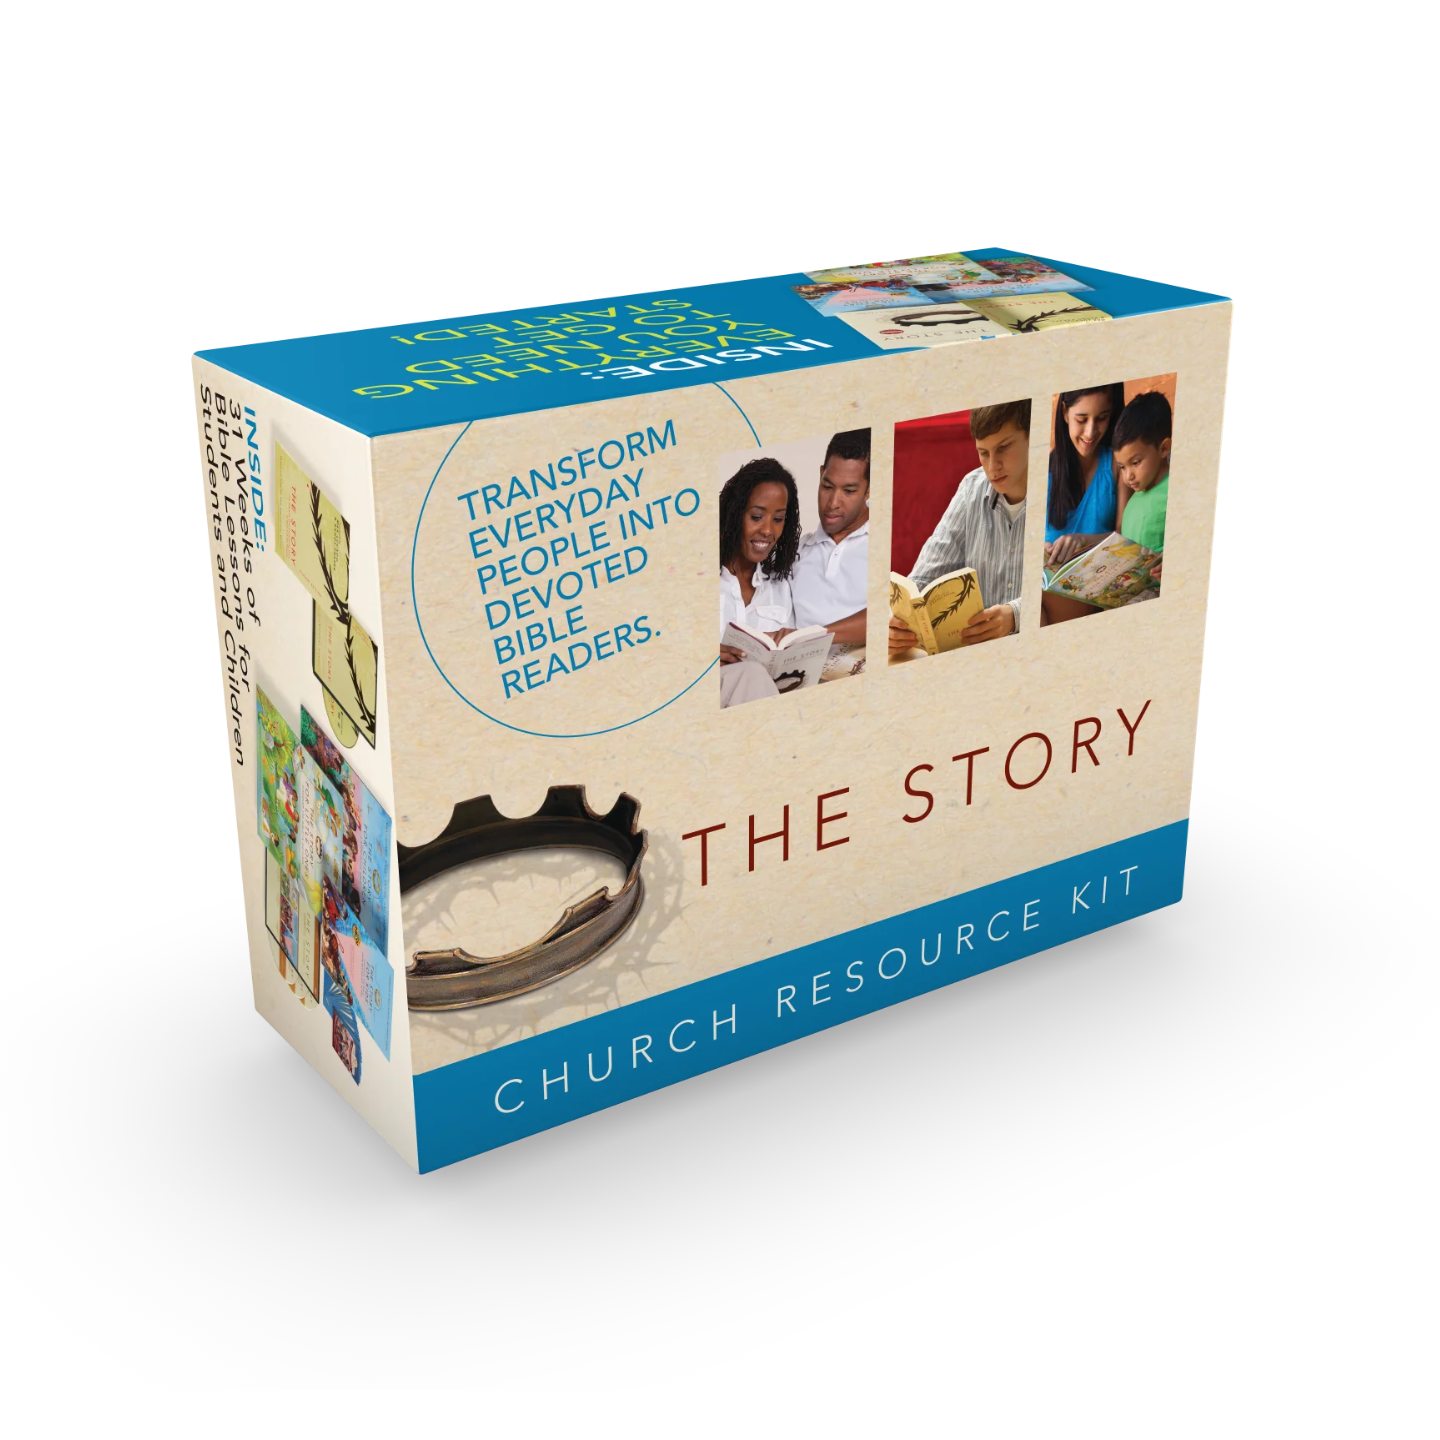 The Story Church Resource Kit